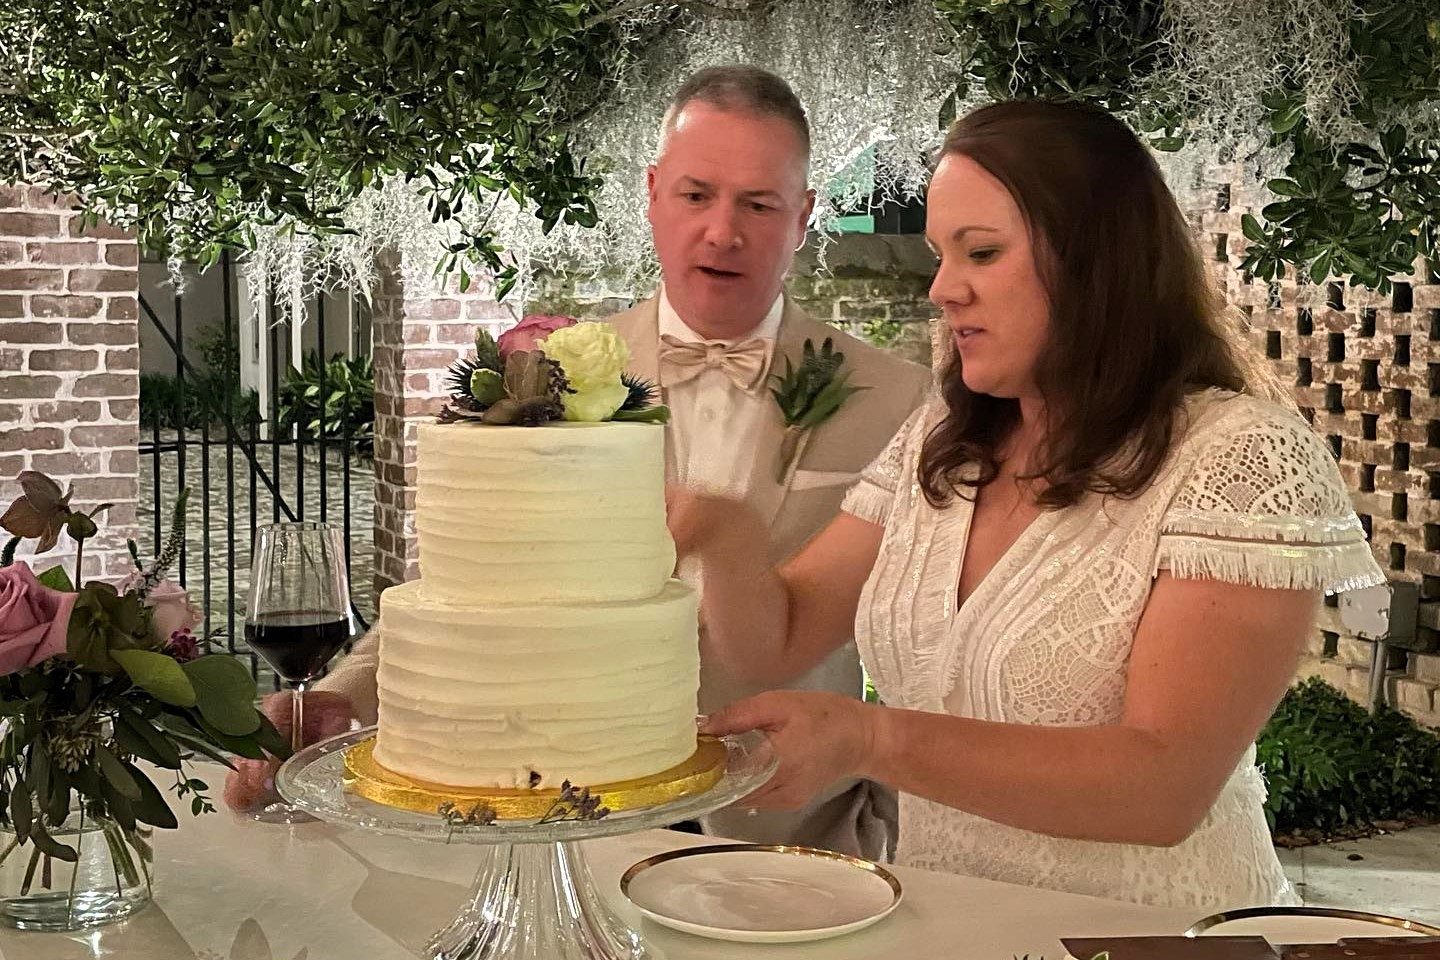 A cake being cut as part of a wedding reception in the garden at the Juliette Gordon Low Birthplace.